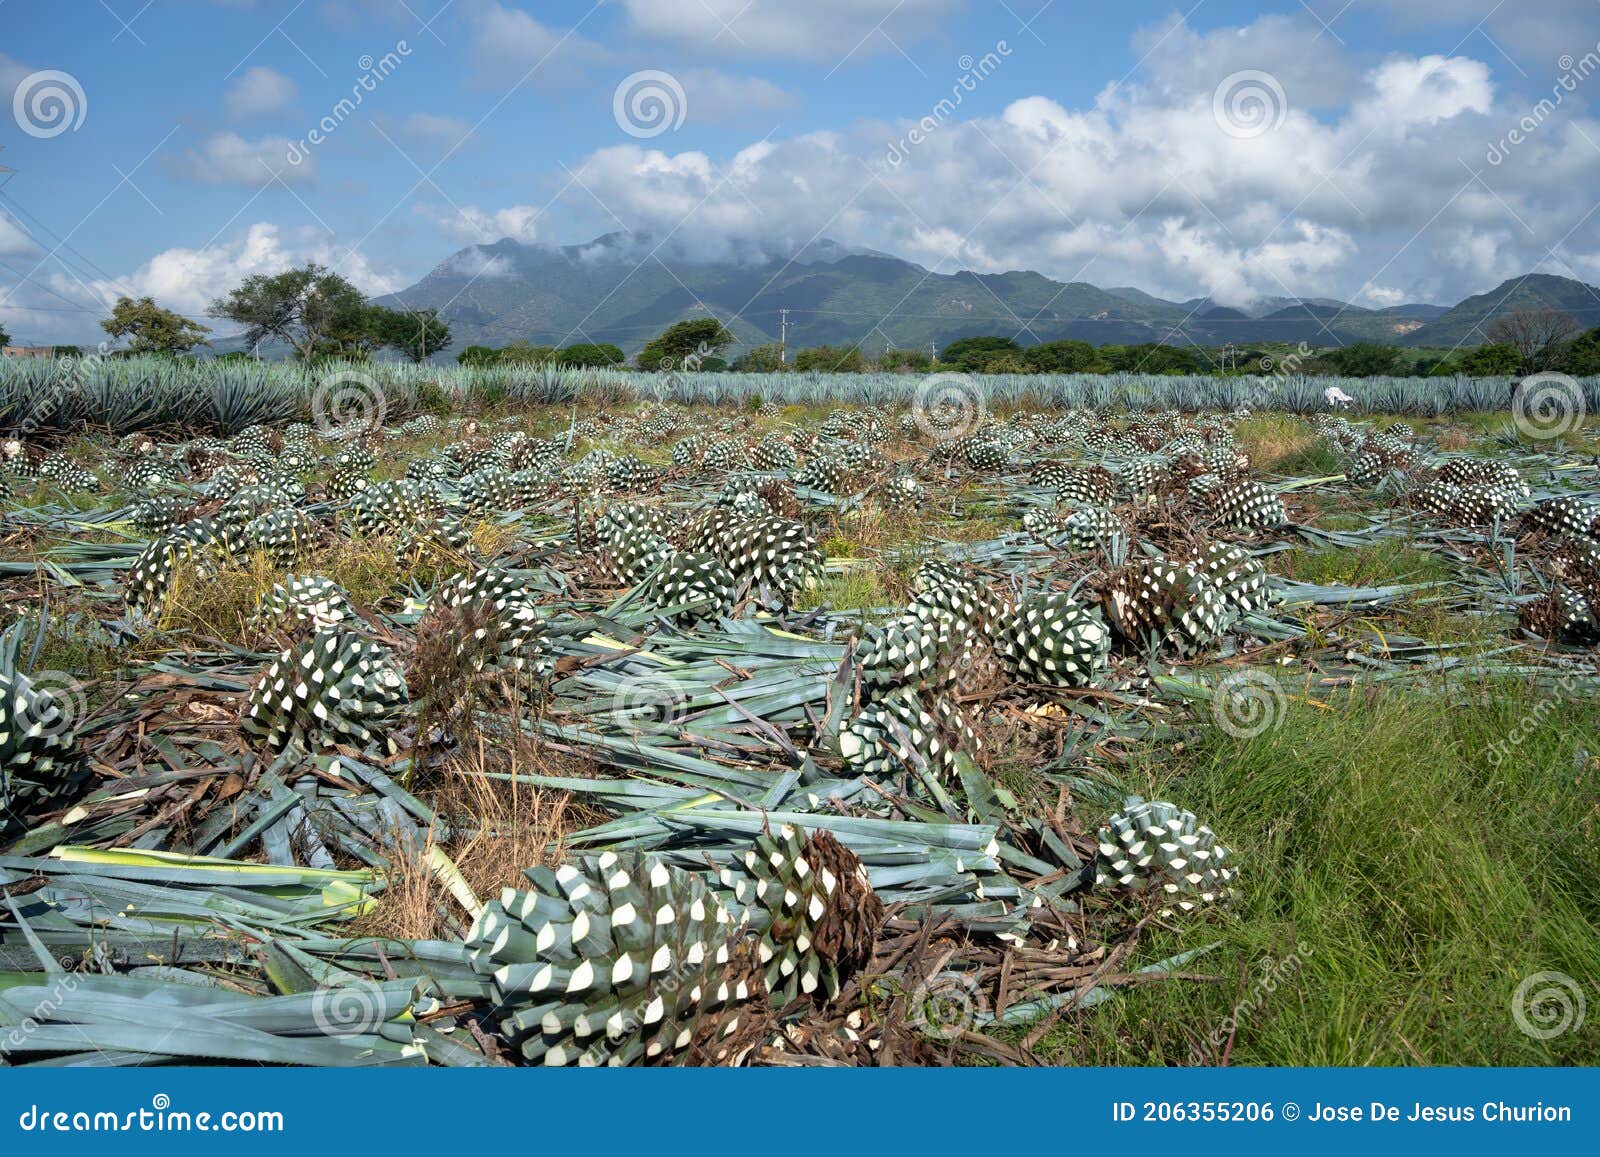 in the agave field the farmers have cut down many agave plants.